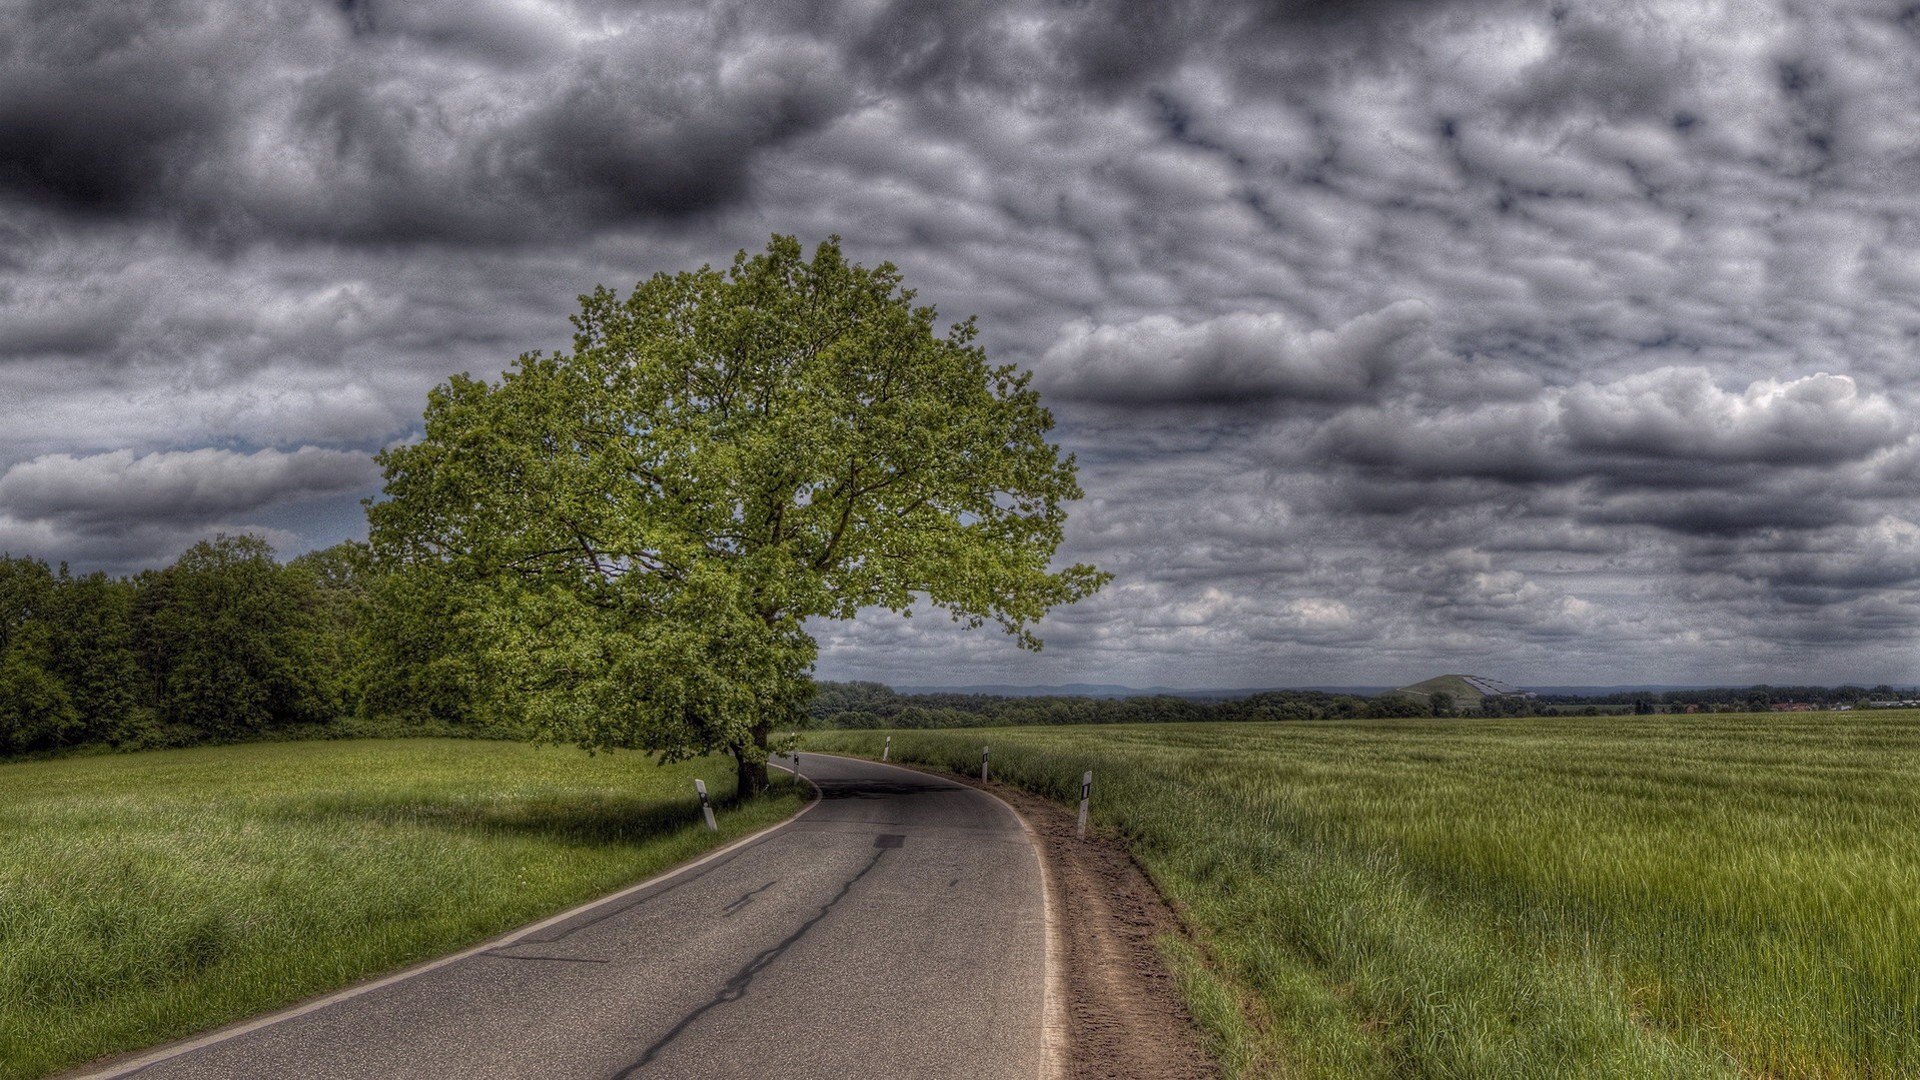 General 1920x1080 nature HDR landscape road sky clouds trees field